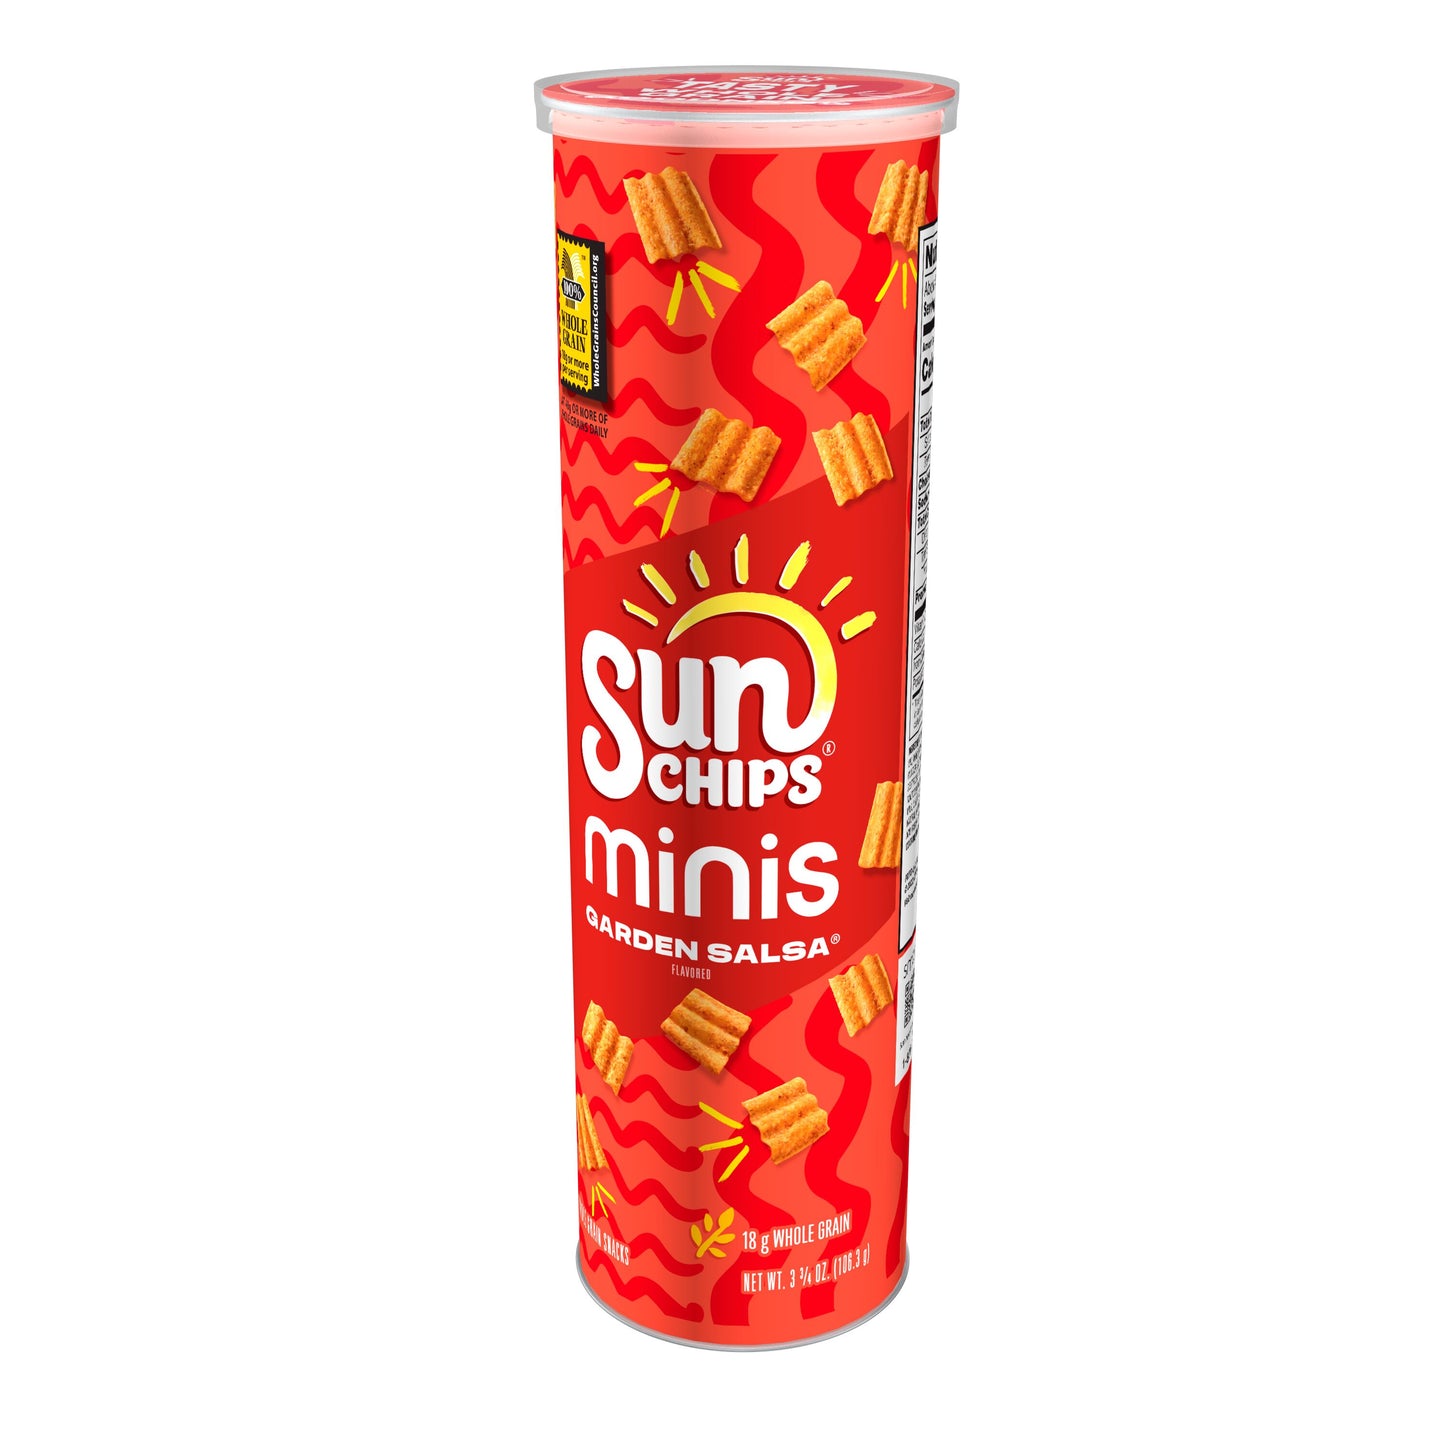 Sun Chips Minis Garden Salsa Take Home Canisters 3.75oz 12ct